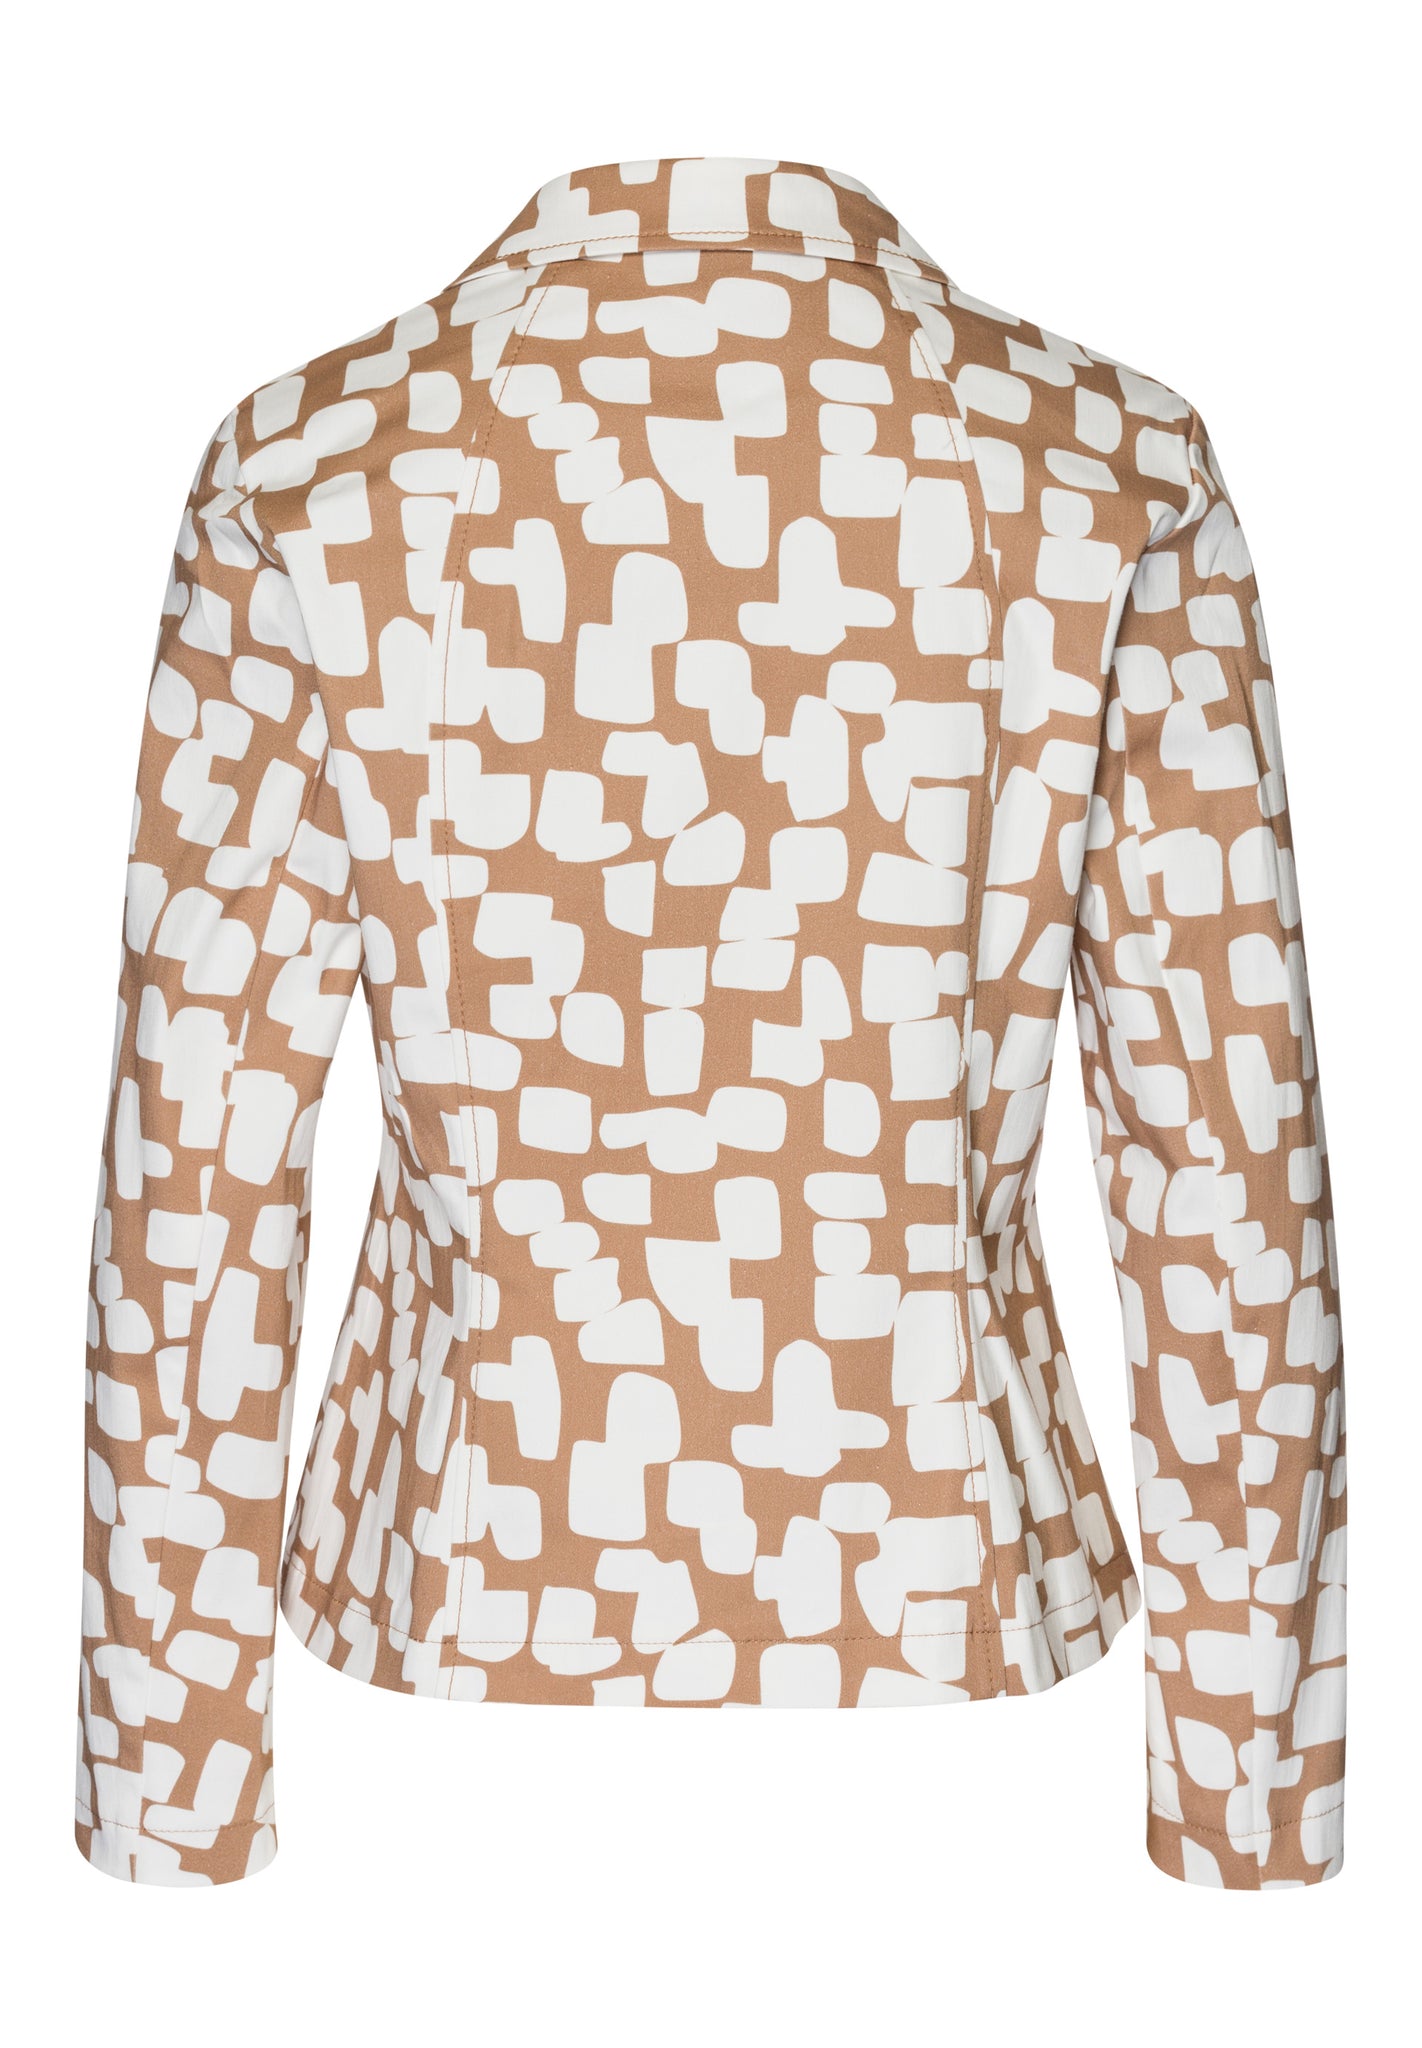 Frank Walder Caffè de roma collection spot print zip up jacket in tan and cream

Product code 202.303